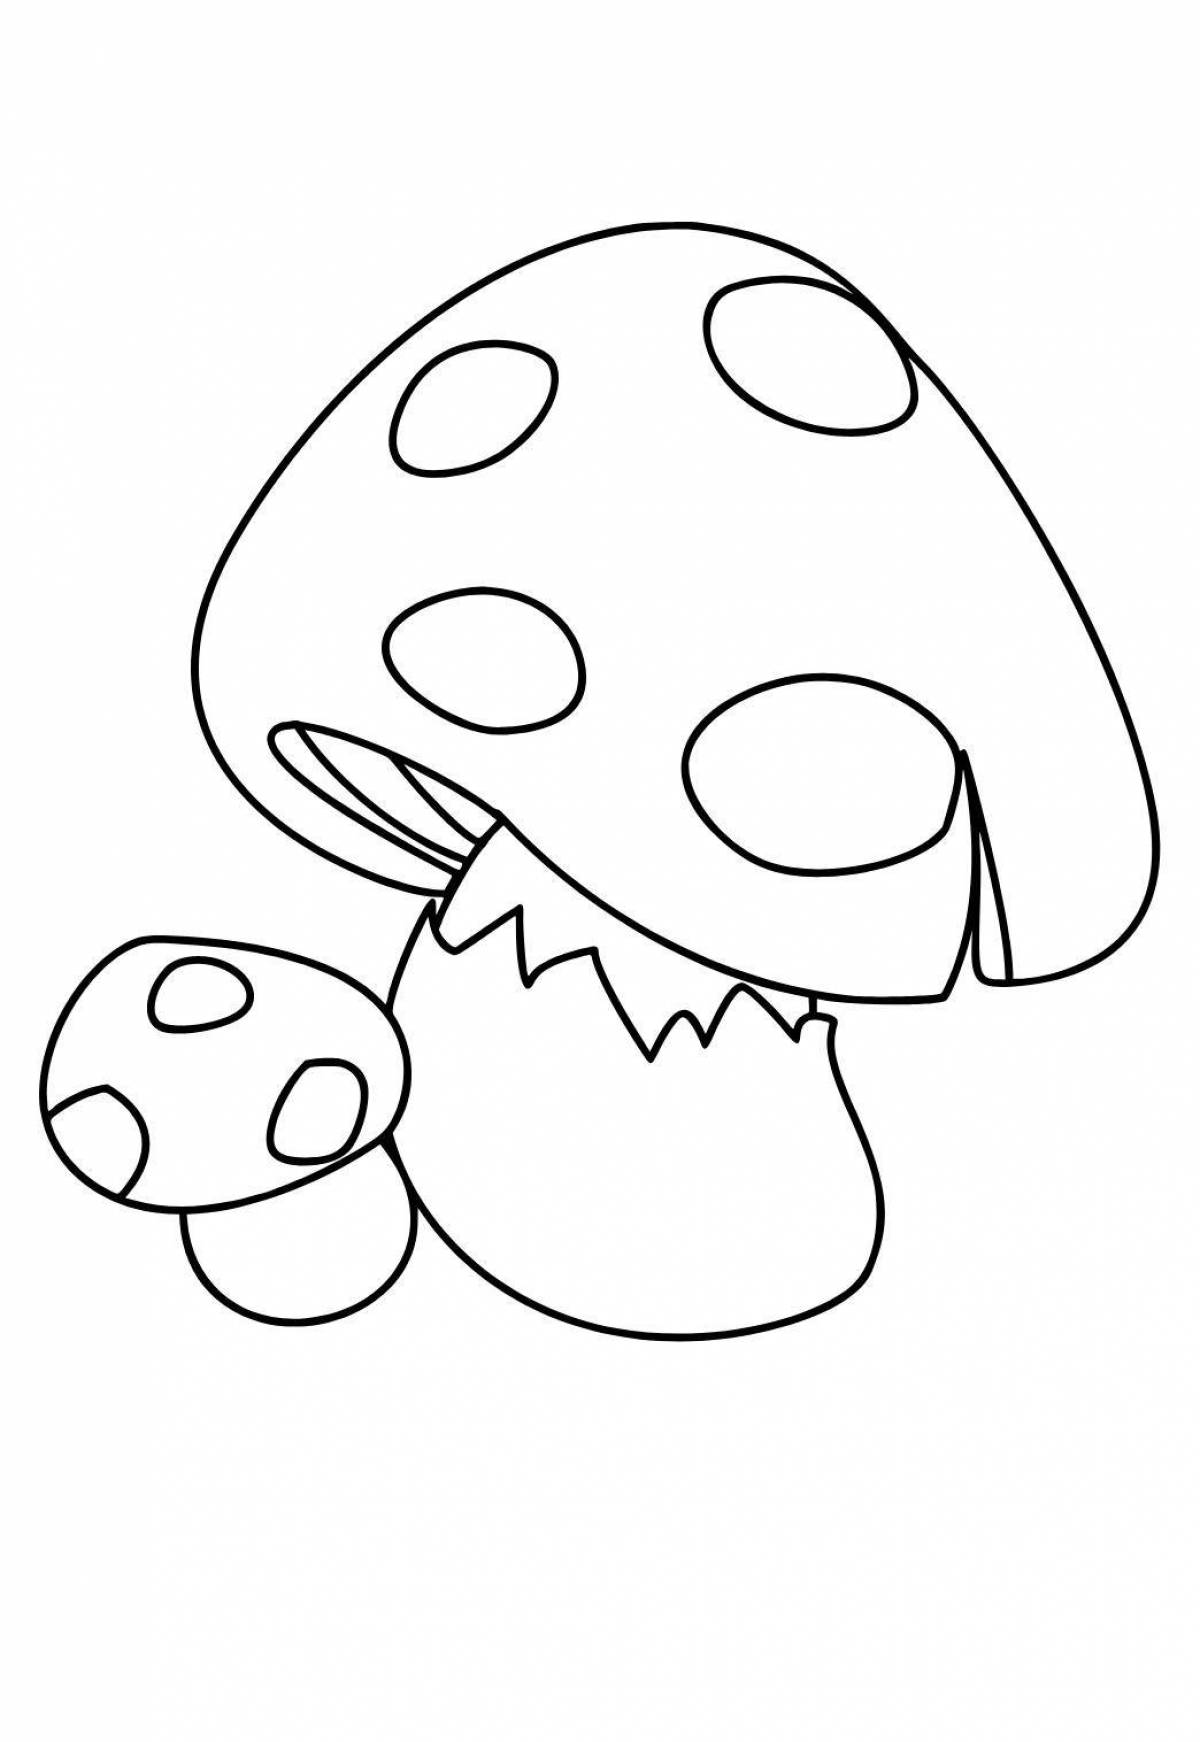 Adorable mushroom coloring book for 3-4 year olds